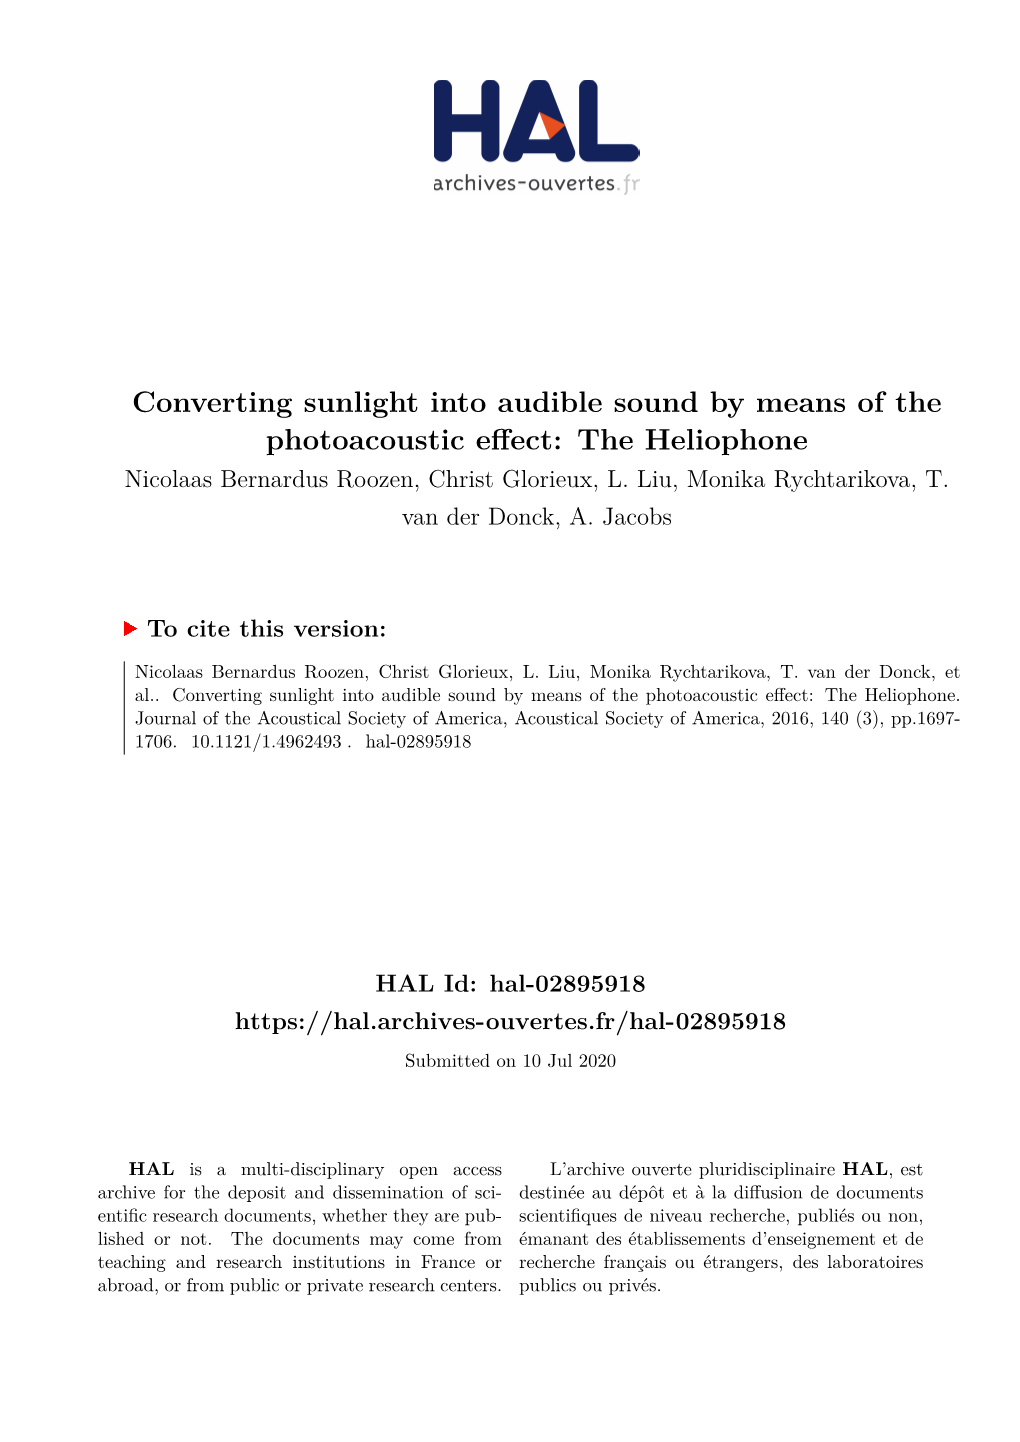 Converting Sunlight Into Audible Sound by Means of the Photoacoustic Effect: the Heliophone Nicolaas Bernardus Roozen, Christ Glorieux, L